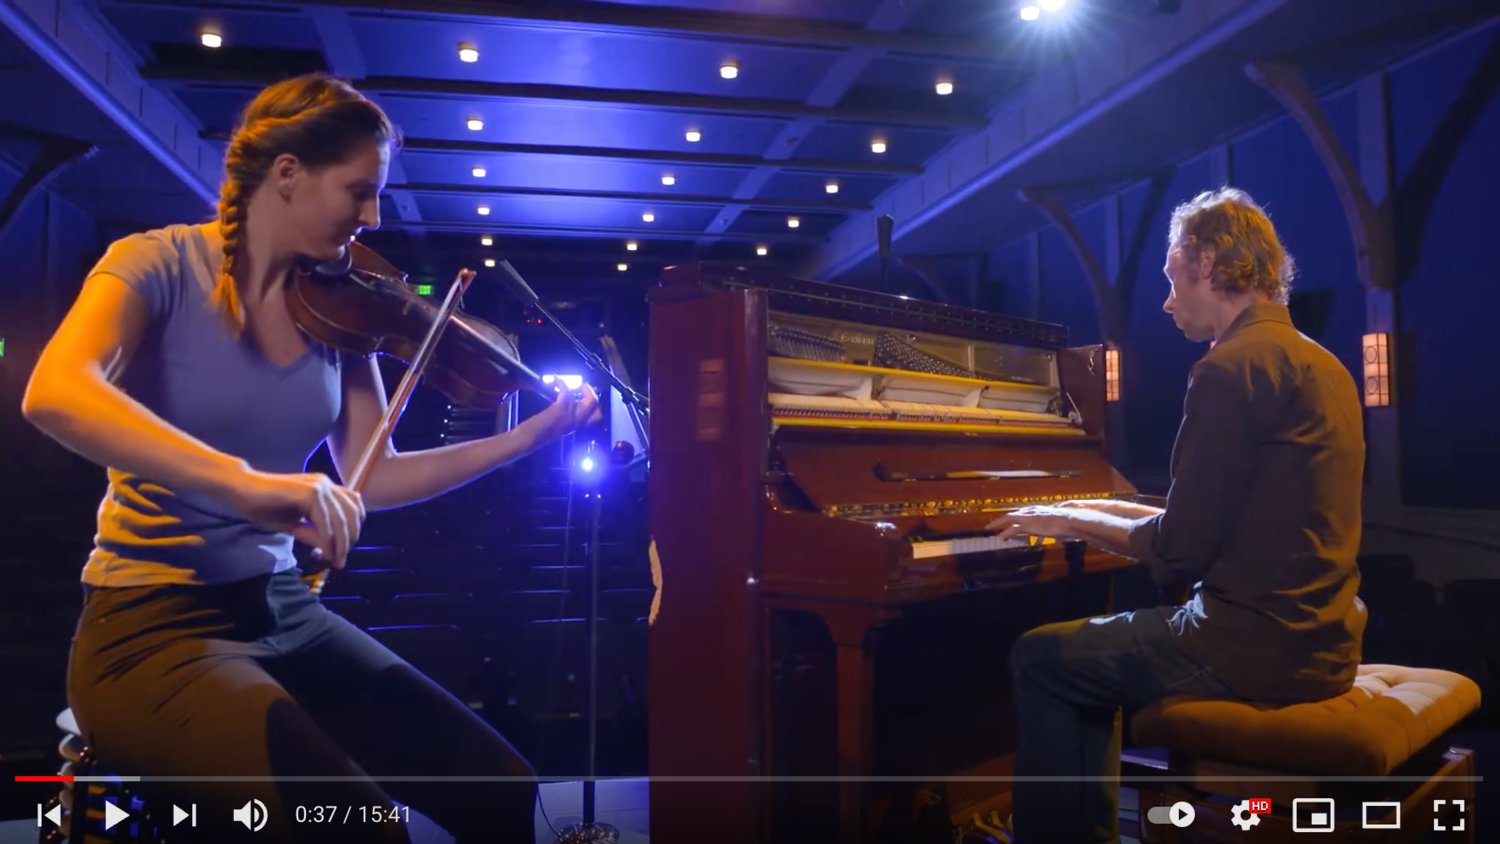 Fiddle player Greame Durovich and pianist Nigel Goss play a selection of traditional Irish songs in the Dreamland Theater’s live online concert series